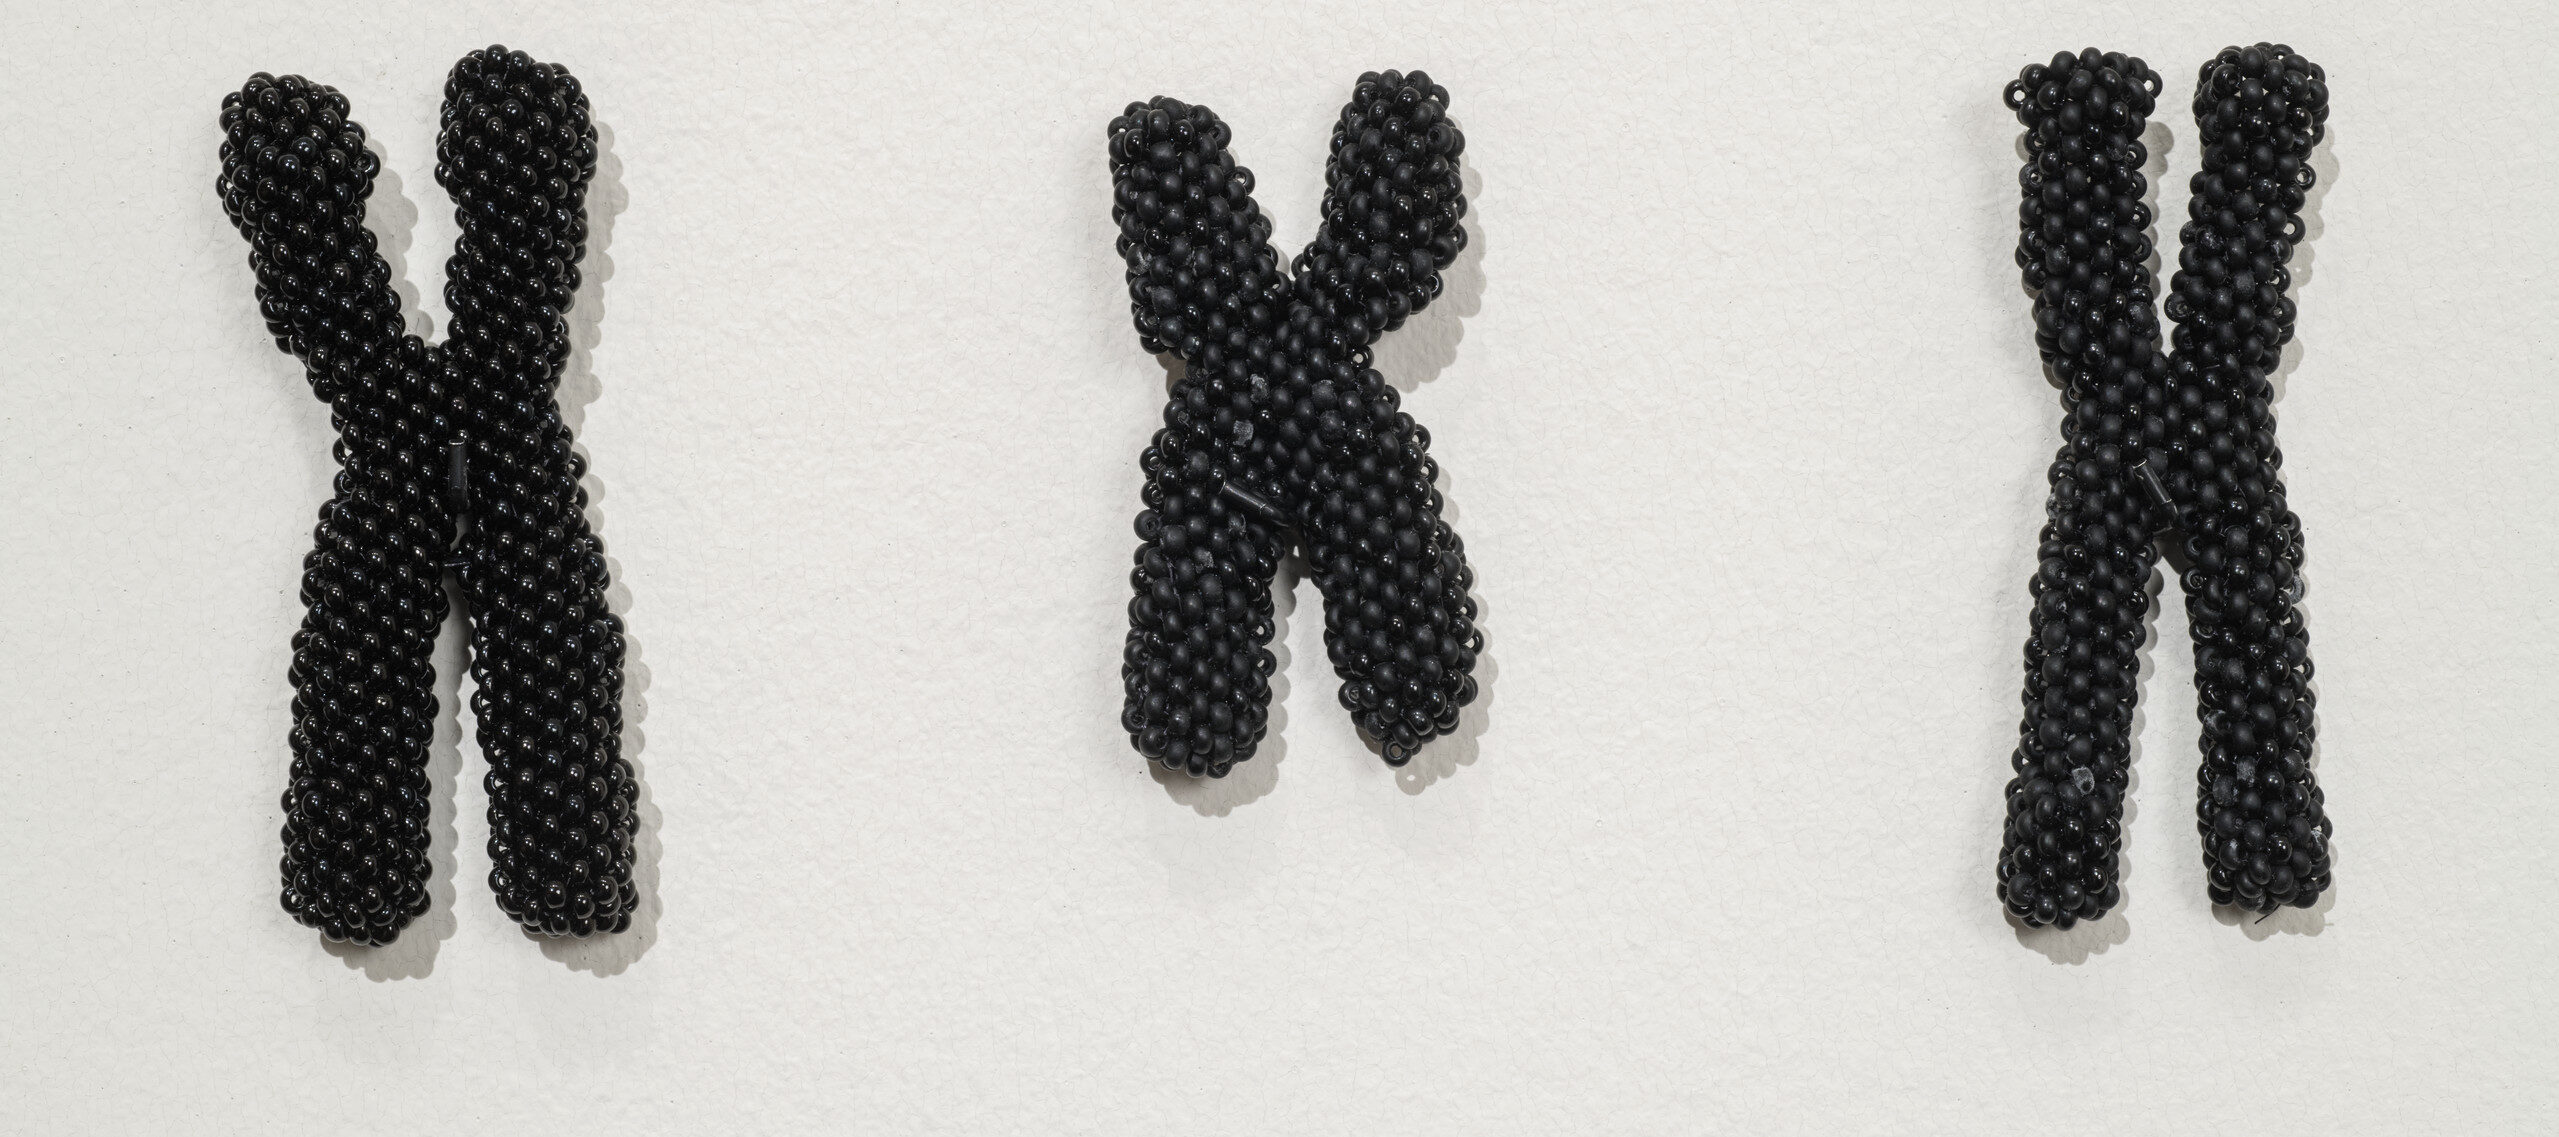 Three X-shaped chromosome pairs created with tiny black beads and arranged in a spaced-out row against a white background.